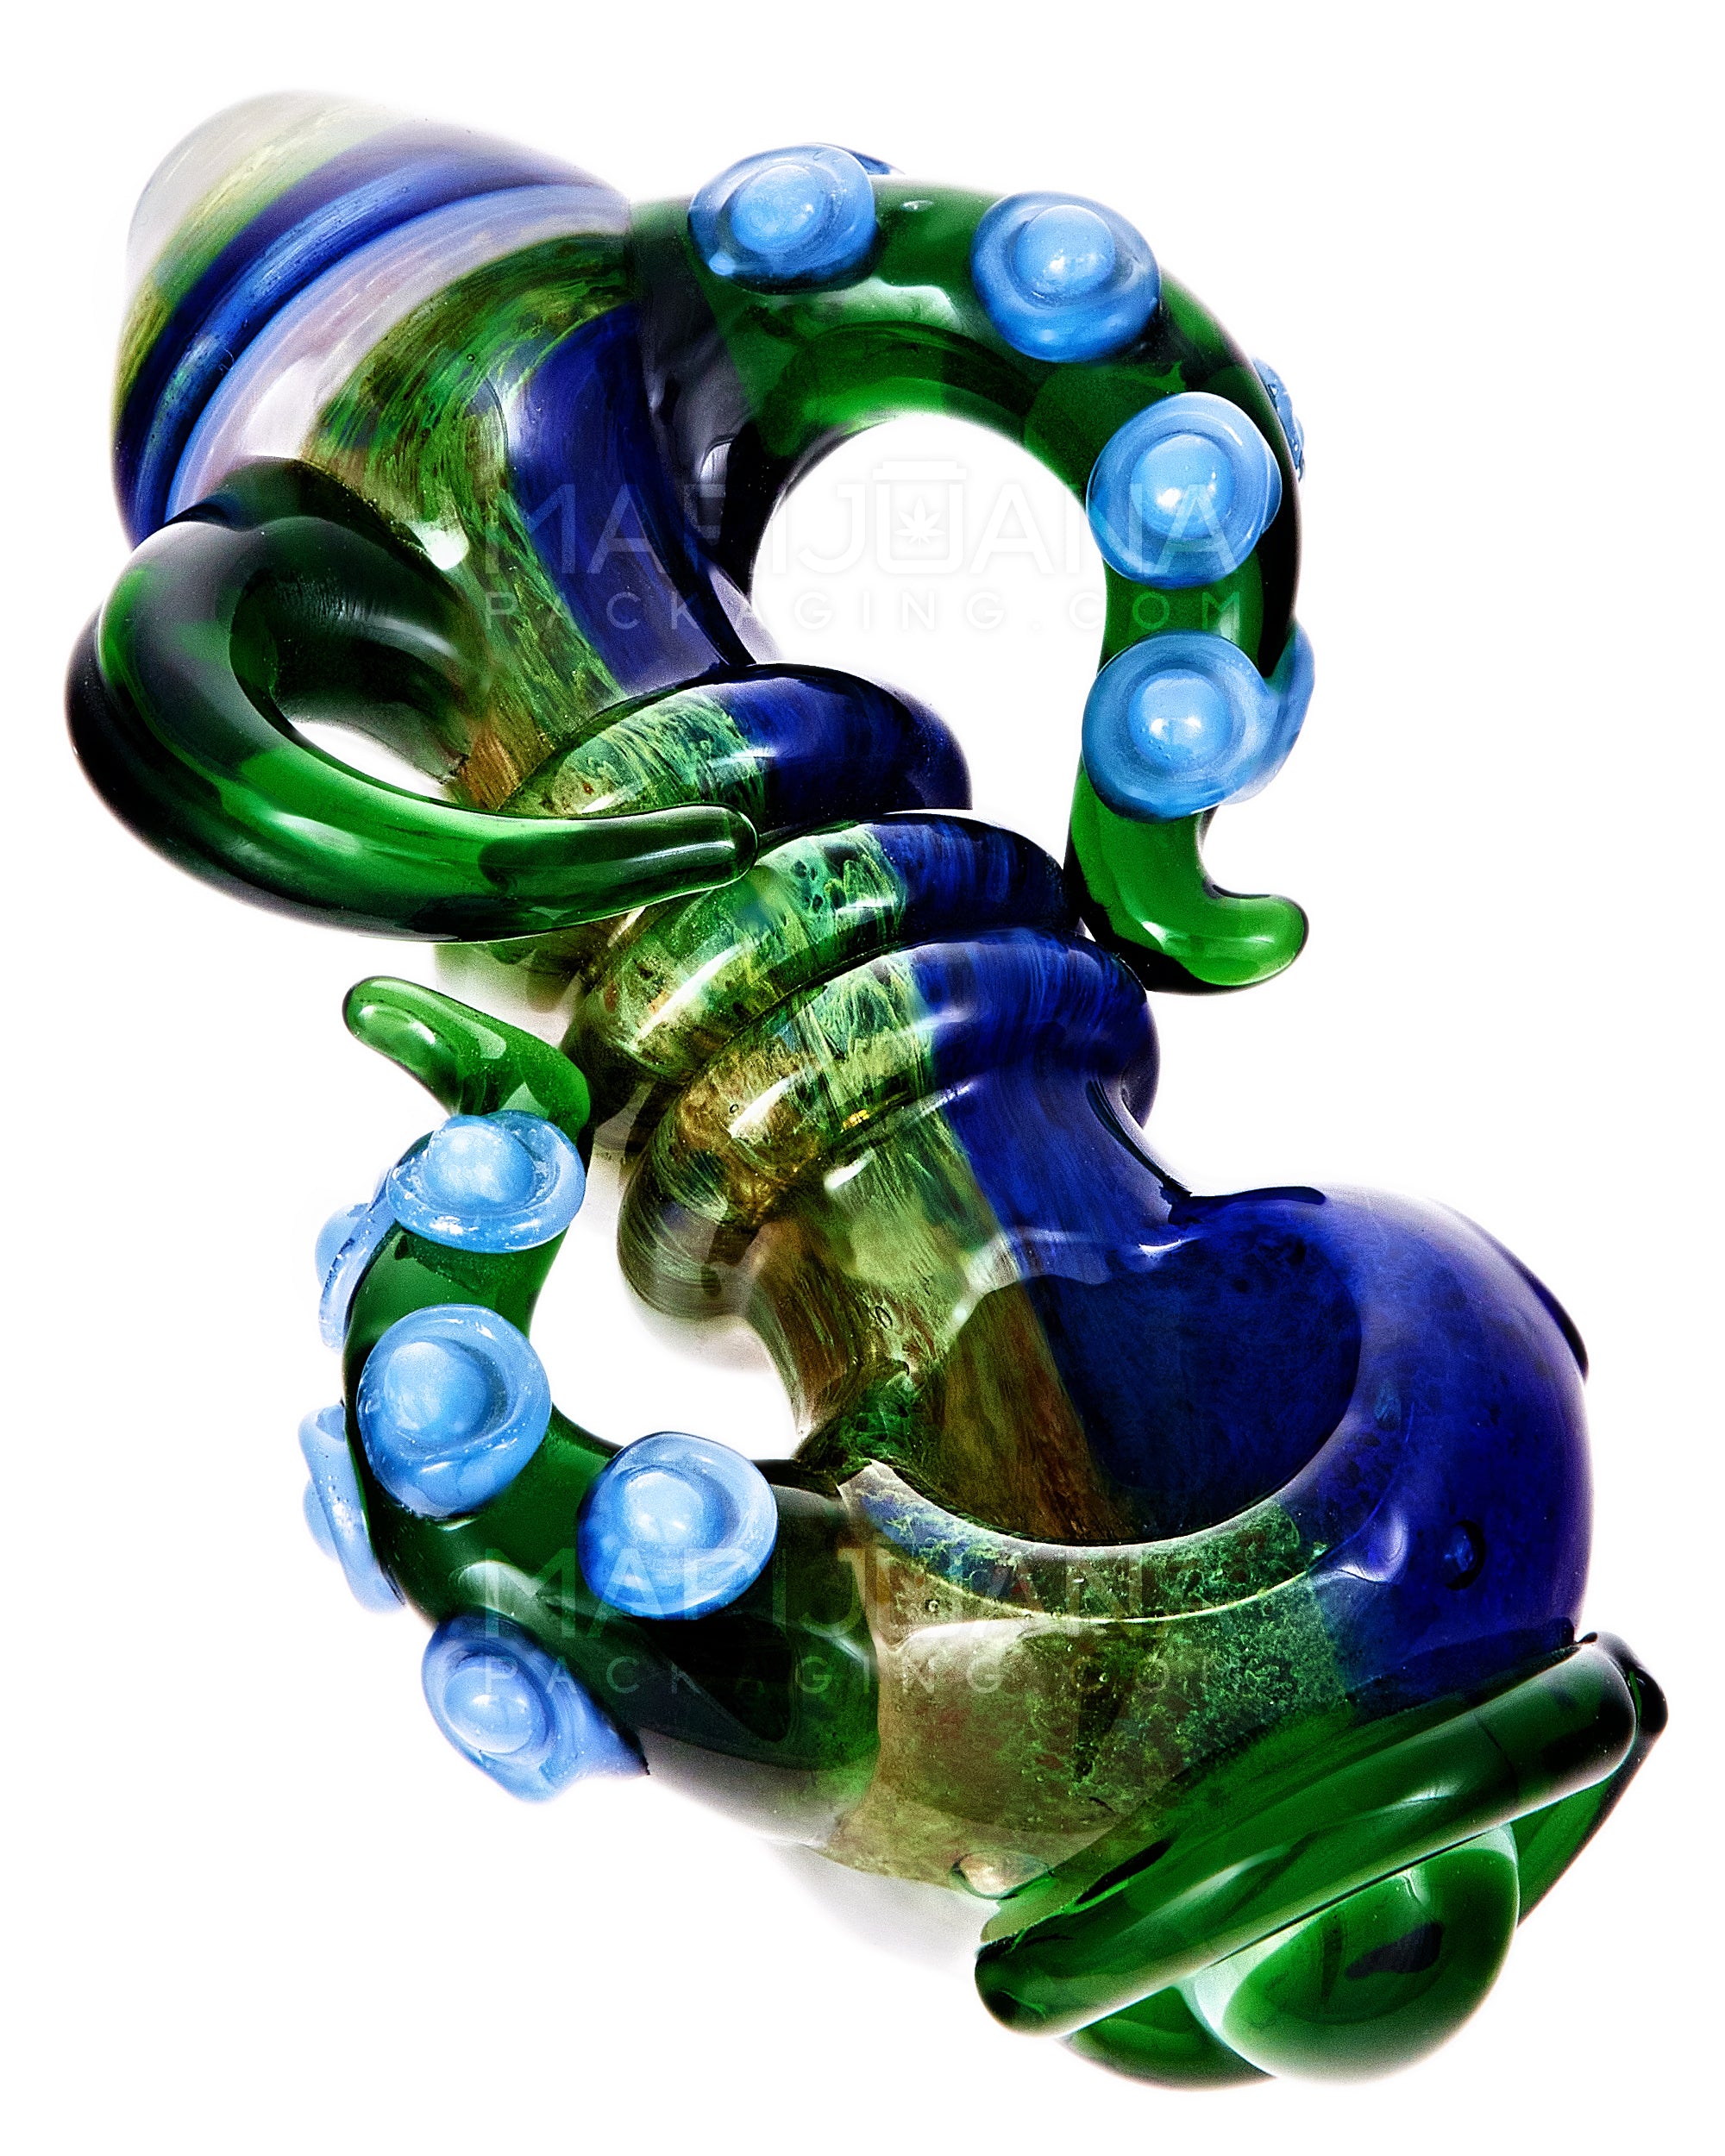 Heady | Triple Ringed Frit Kraken Spoon Hand Pipe w/ Marble Eye & Double Tentacles | 6in Long - Very Thick Glass - 9